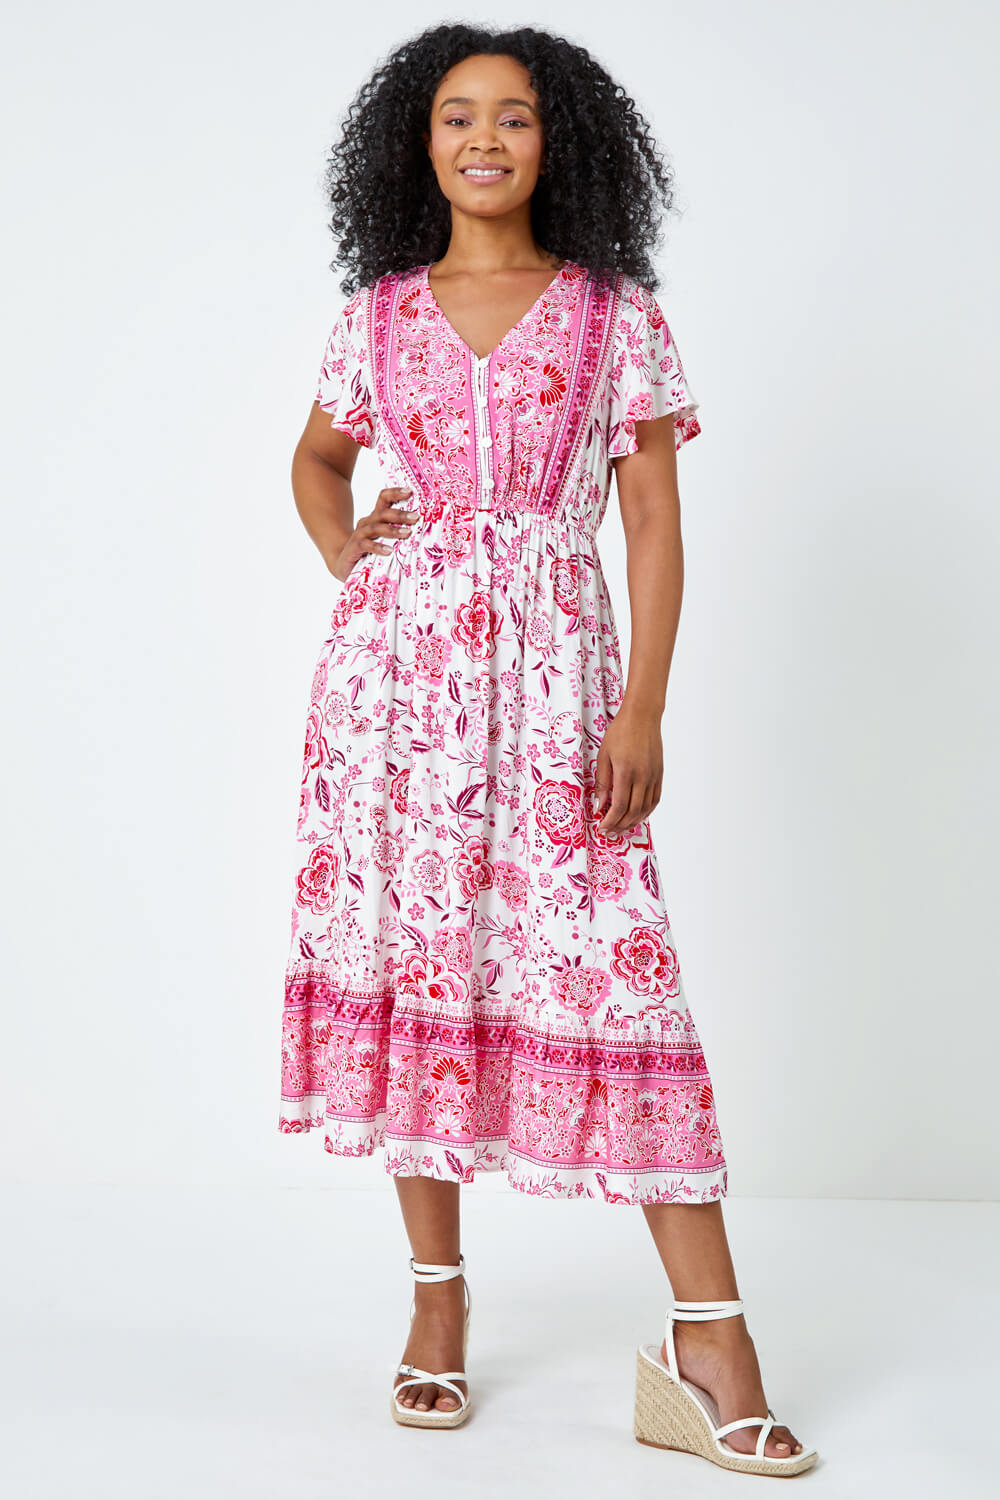 PINK Petite Floral Print Tiered Boho Dress, Image 2 of 5